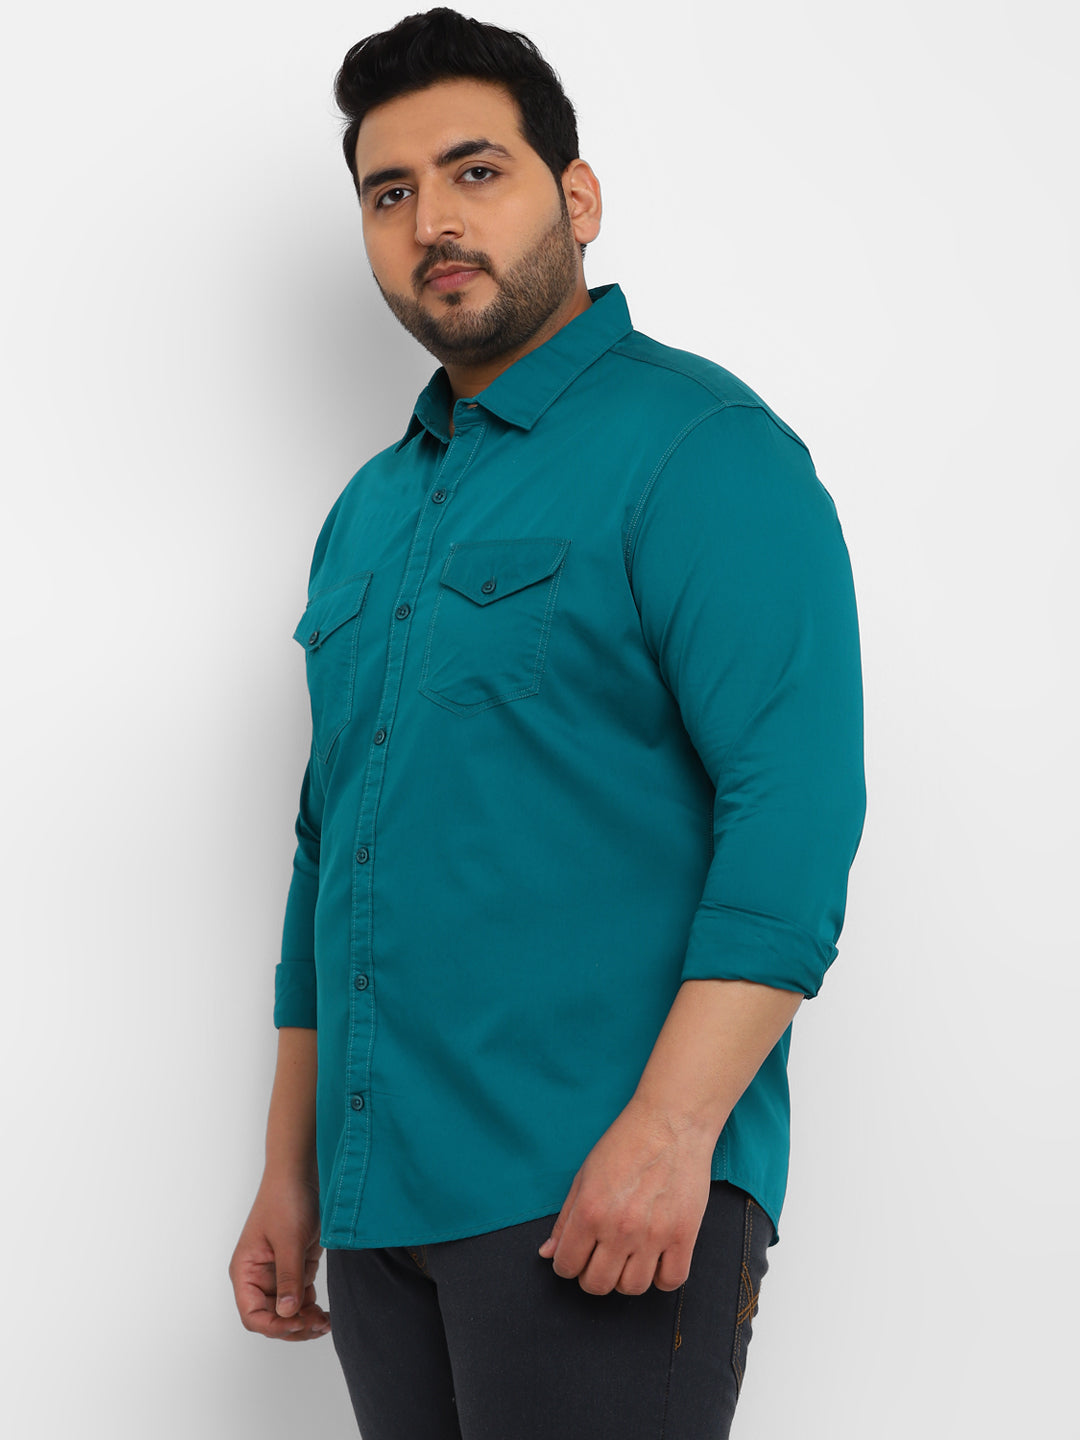 Plus Men's Green Cotton Full Sleeve Regular Fit Casual Solid Shirt